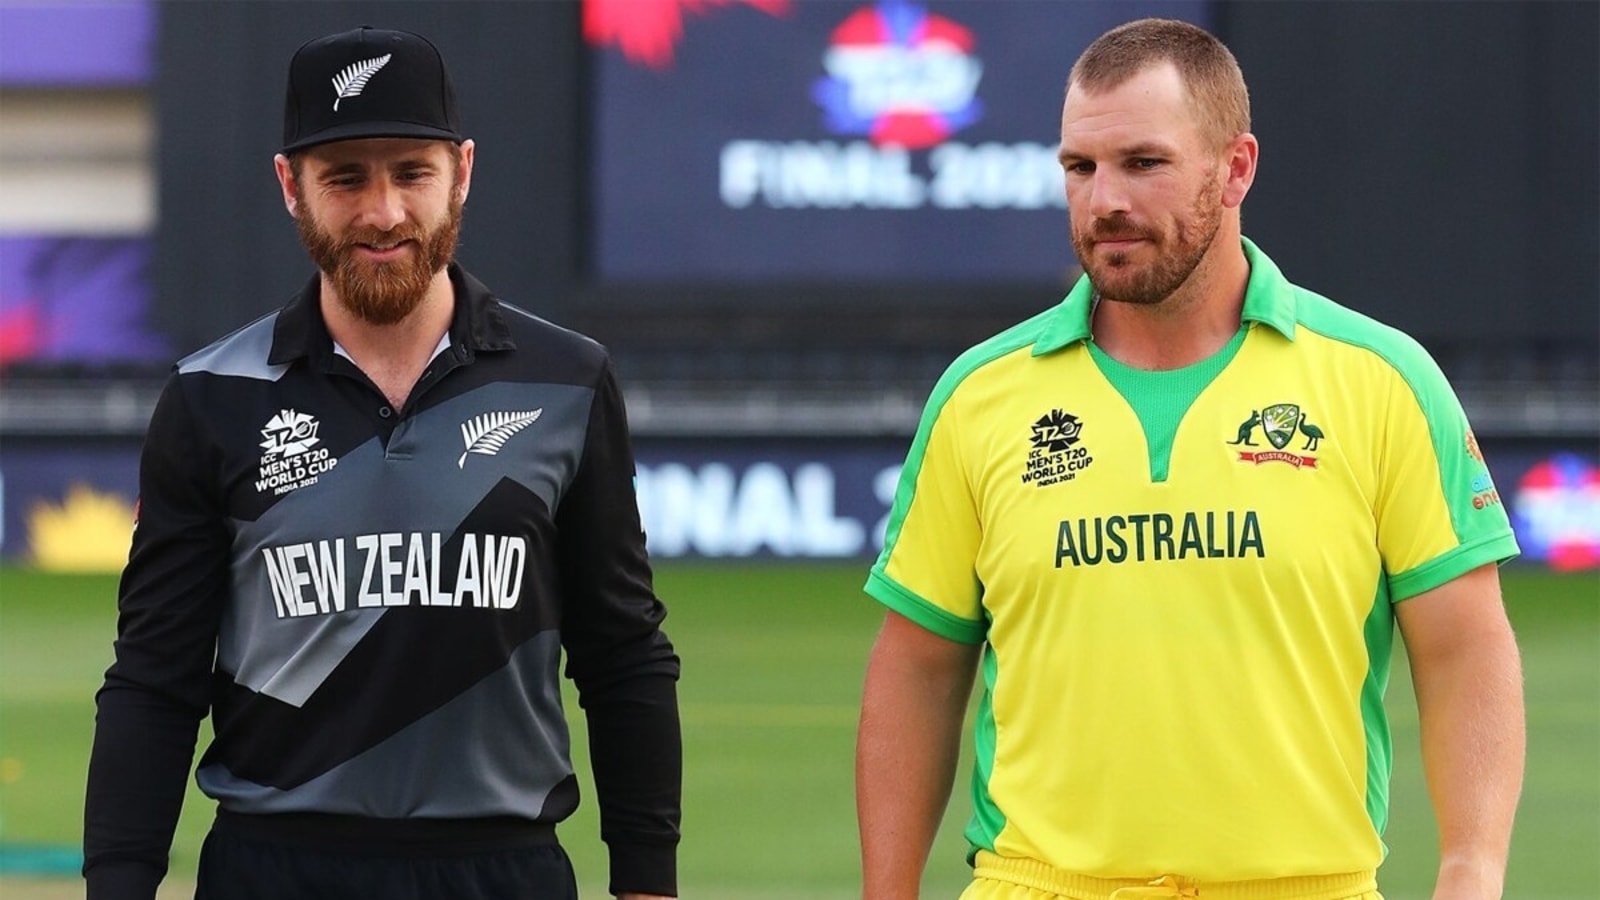 NZ vs AUS, T20 World Cup 2021 Final Live Streaming When and Where to watch Australia vs New Zealand Live on TV, Online Cricket